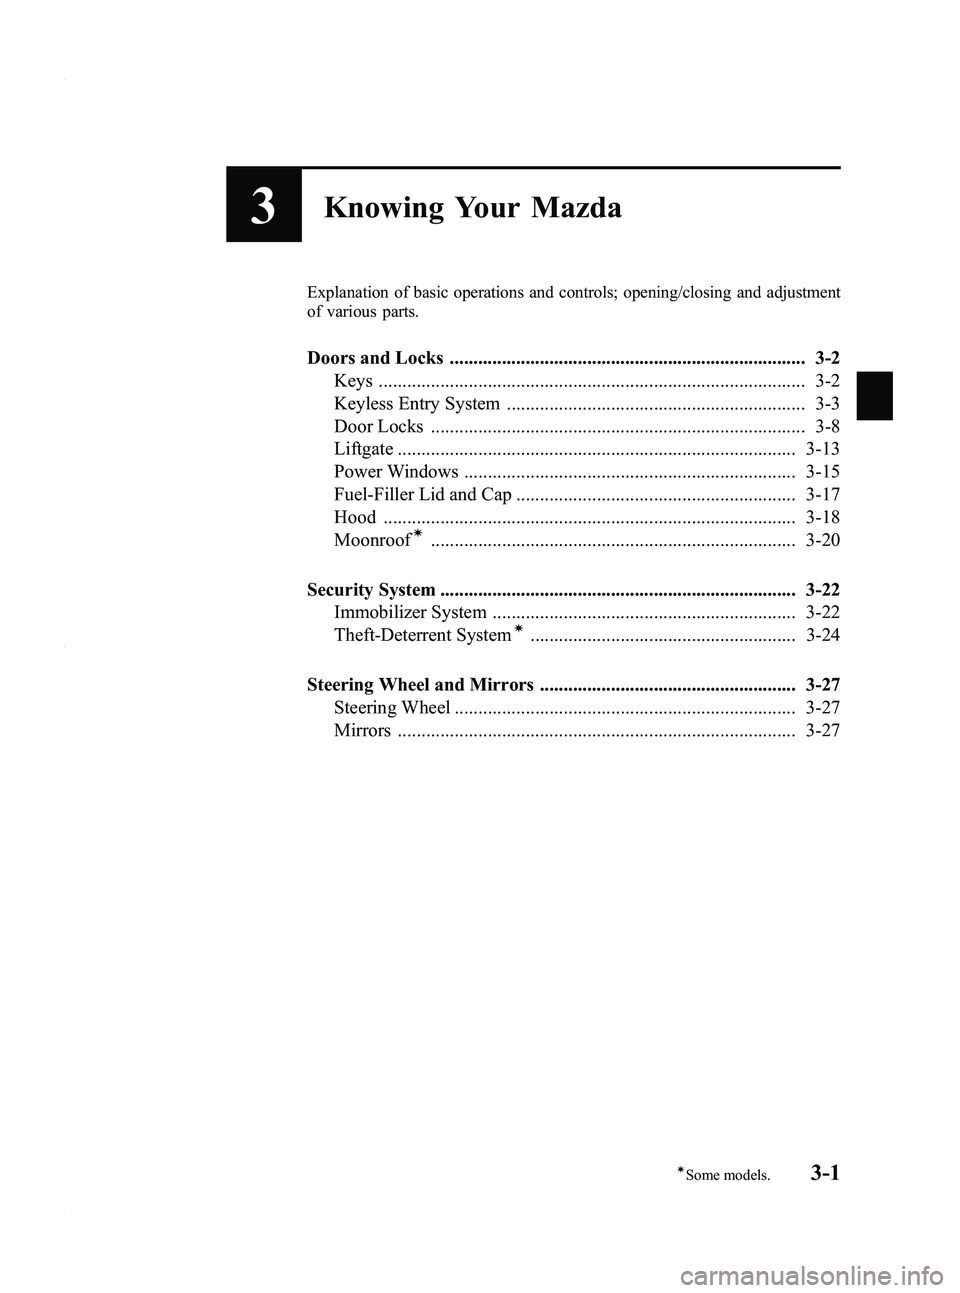 MAZDA MODEL 5 2010  Owners Manual Black plate (67,1)
3Knowing Your Mazda
Explanation of basic operations and controls; opening/closing and adjustment
of various parts.
Doors and Locks ..................................................